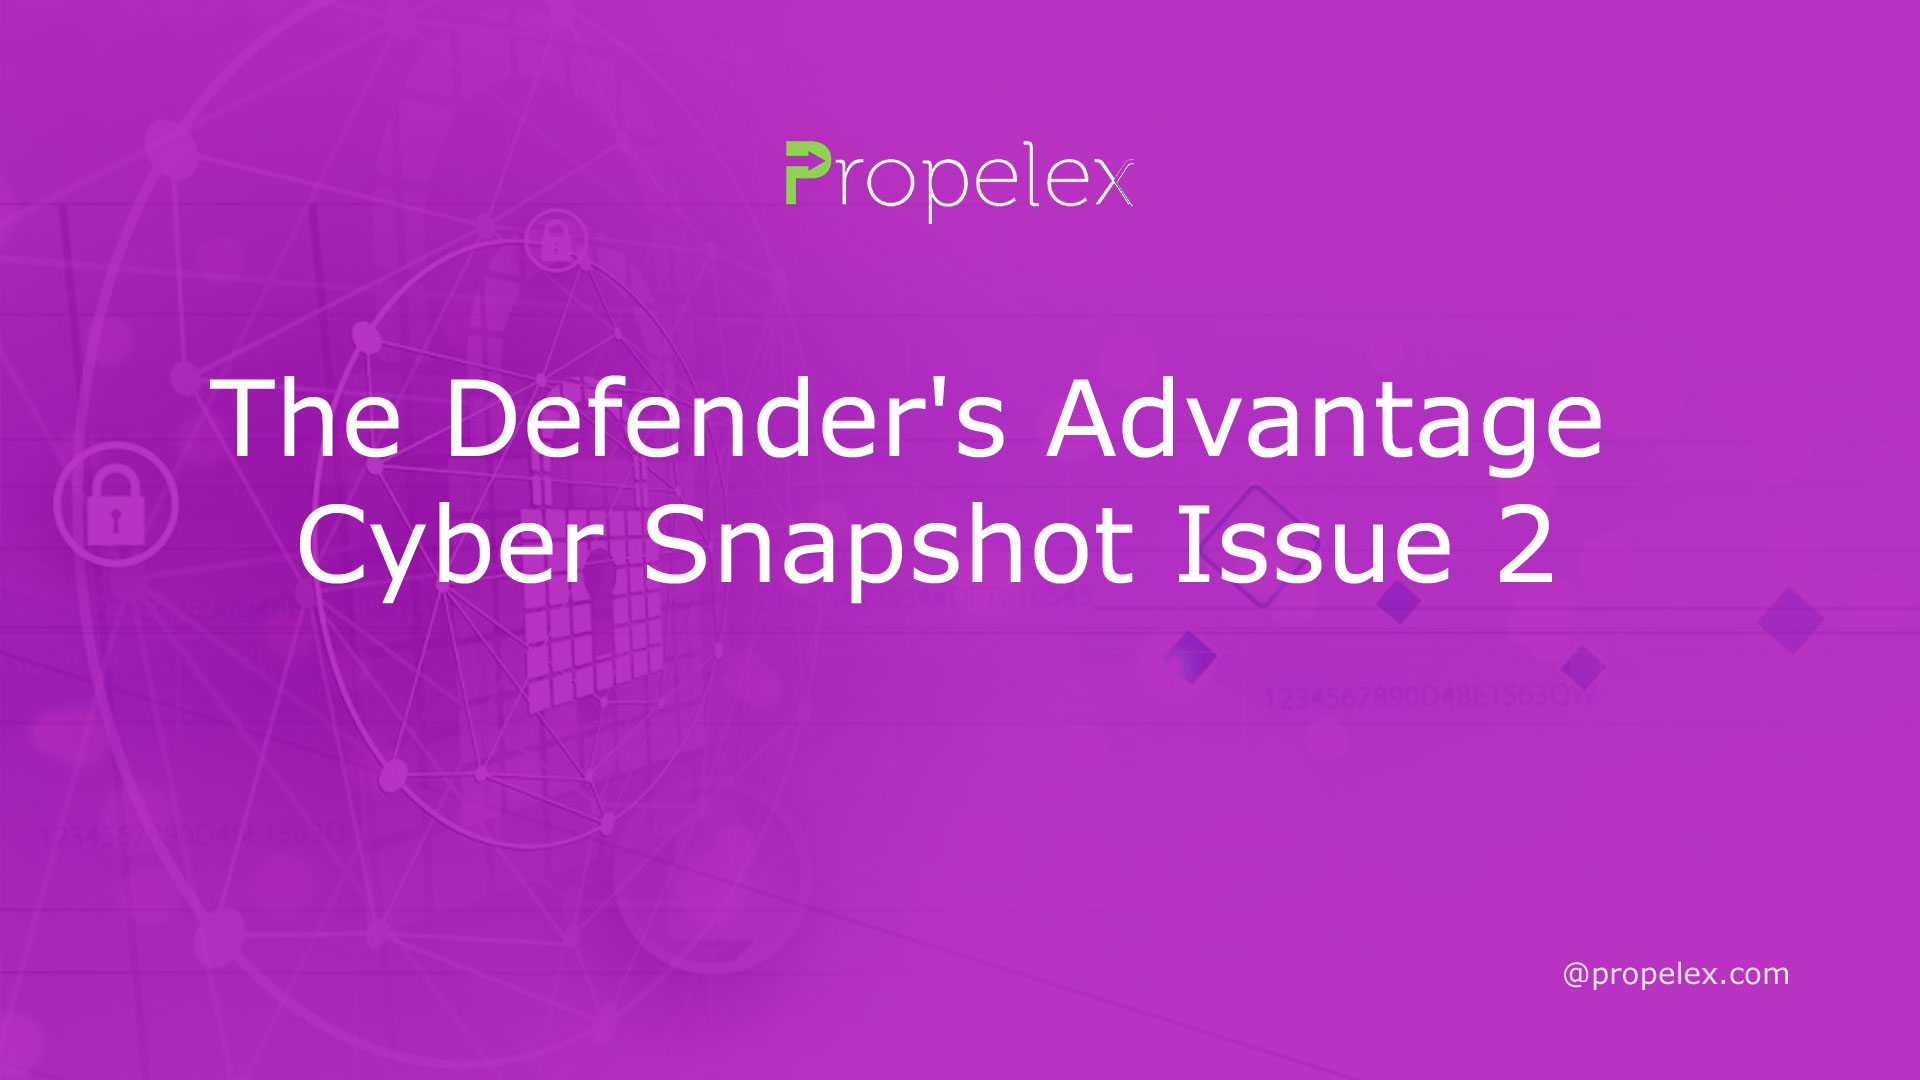 The Defender's Advantage Cyber Snapshot Issue 2